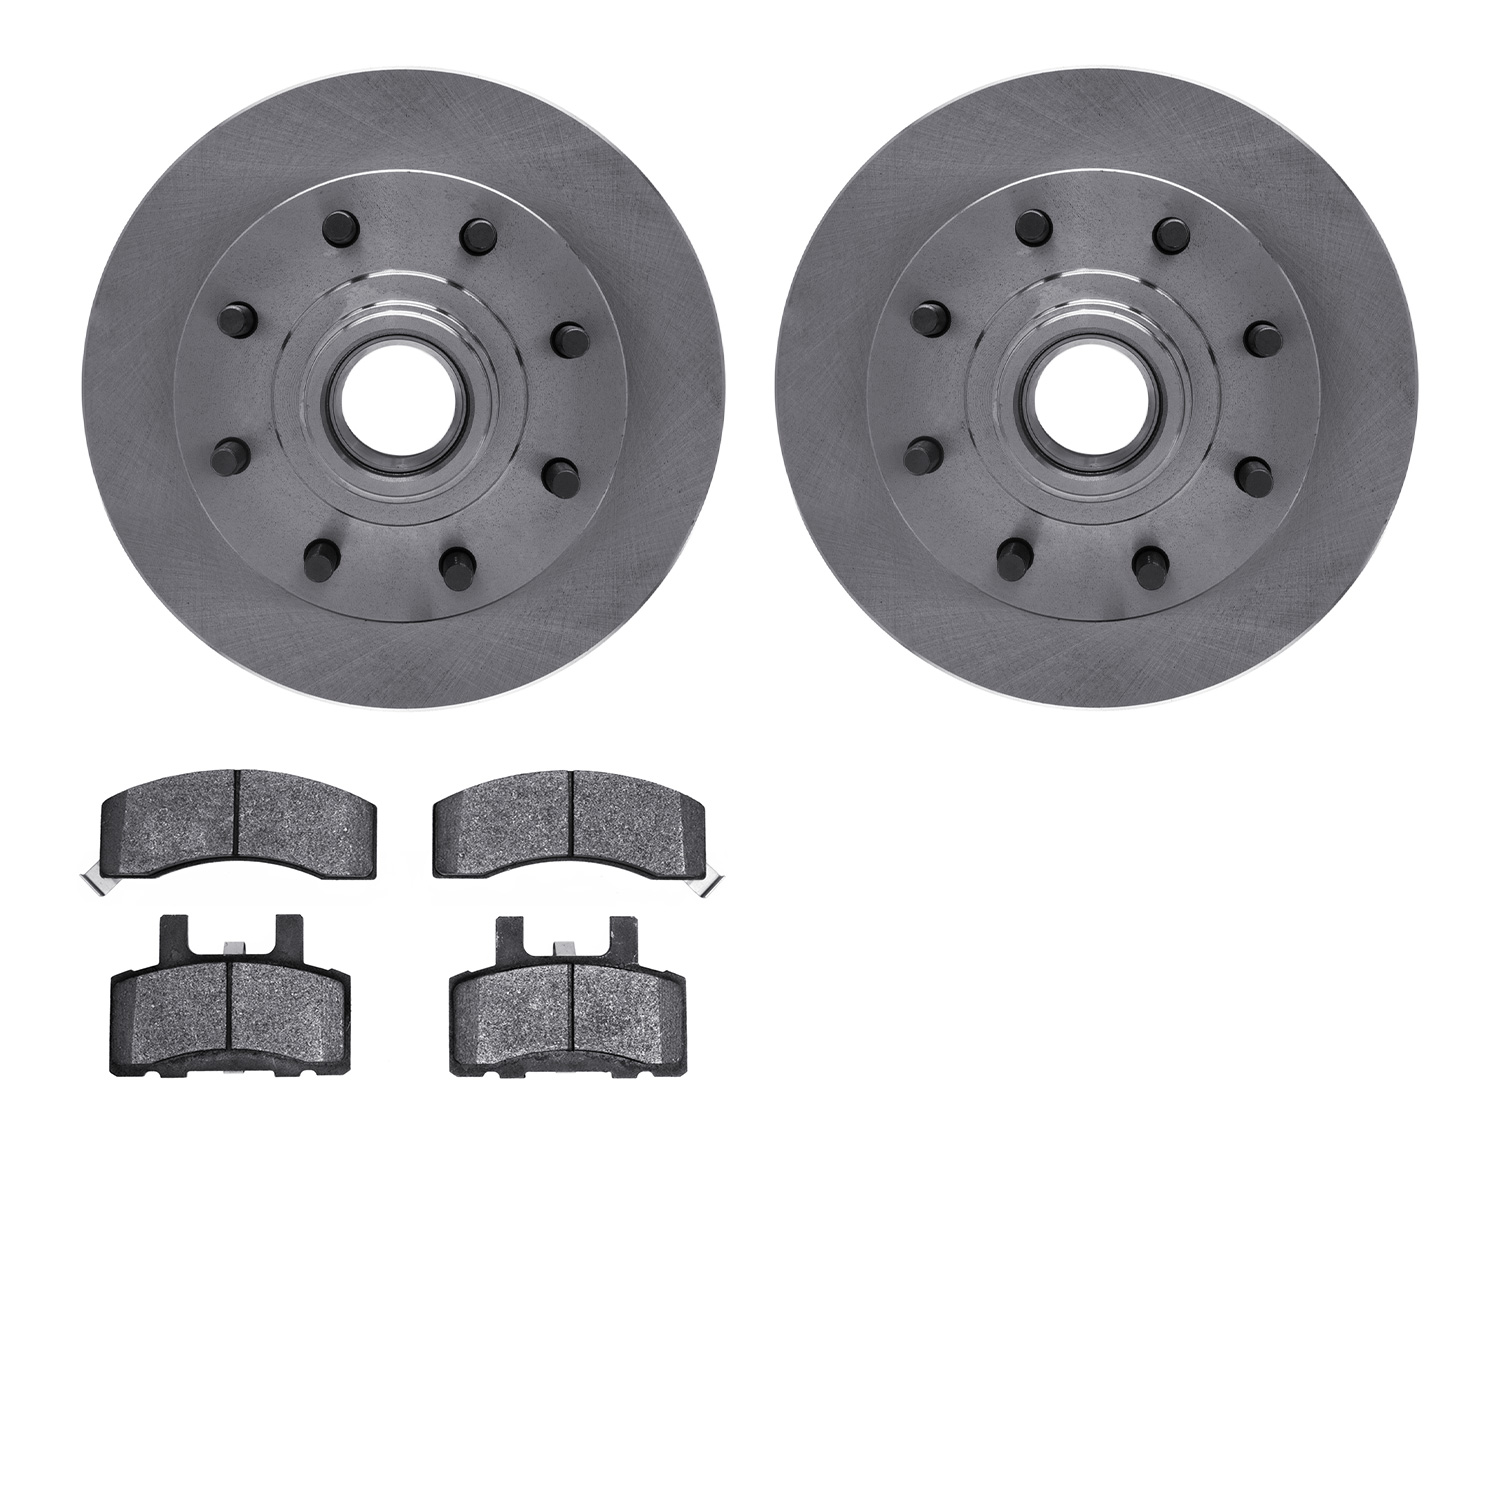 6402-48040 Brake Rotors with Ultimate-Duty Brake Pads, 1992-2002 GM, Position: Front